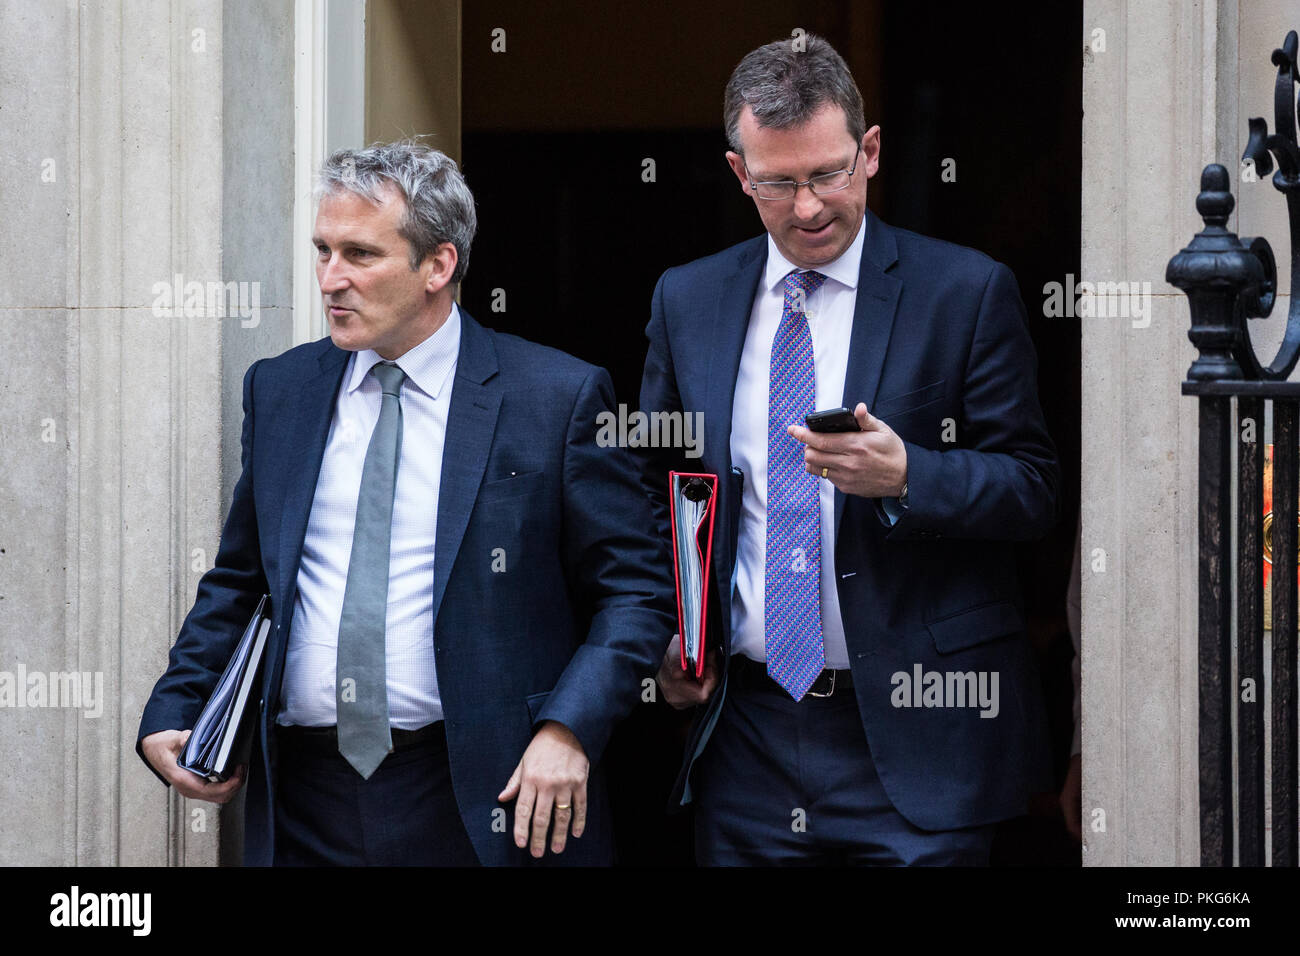 London, UK. 13th September, 2018. Damian Hinds MP, Secretary of State for Education, and Jeremy Wright MP, Secretary of State for Digital, Culture, Media and Sport leave 10 Downing Street following a Cabinet meeting to discuss the government’s preparations for No Deal. Credit: Mark Kerrison/Alamy Live News Stock Photo